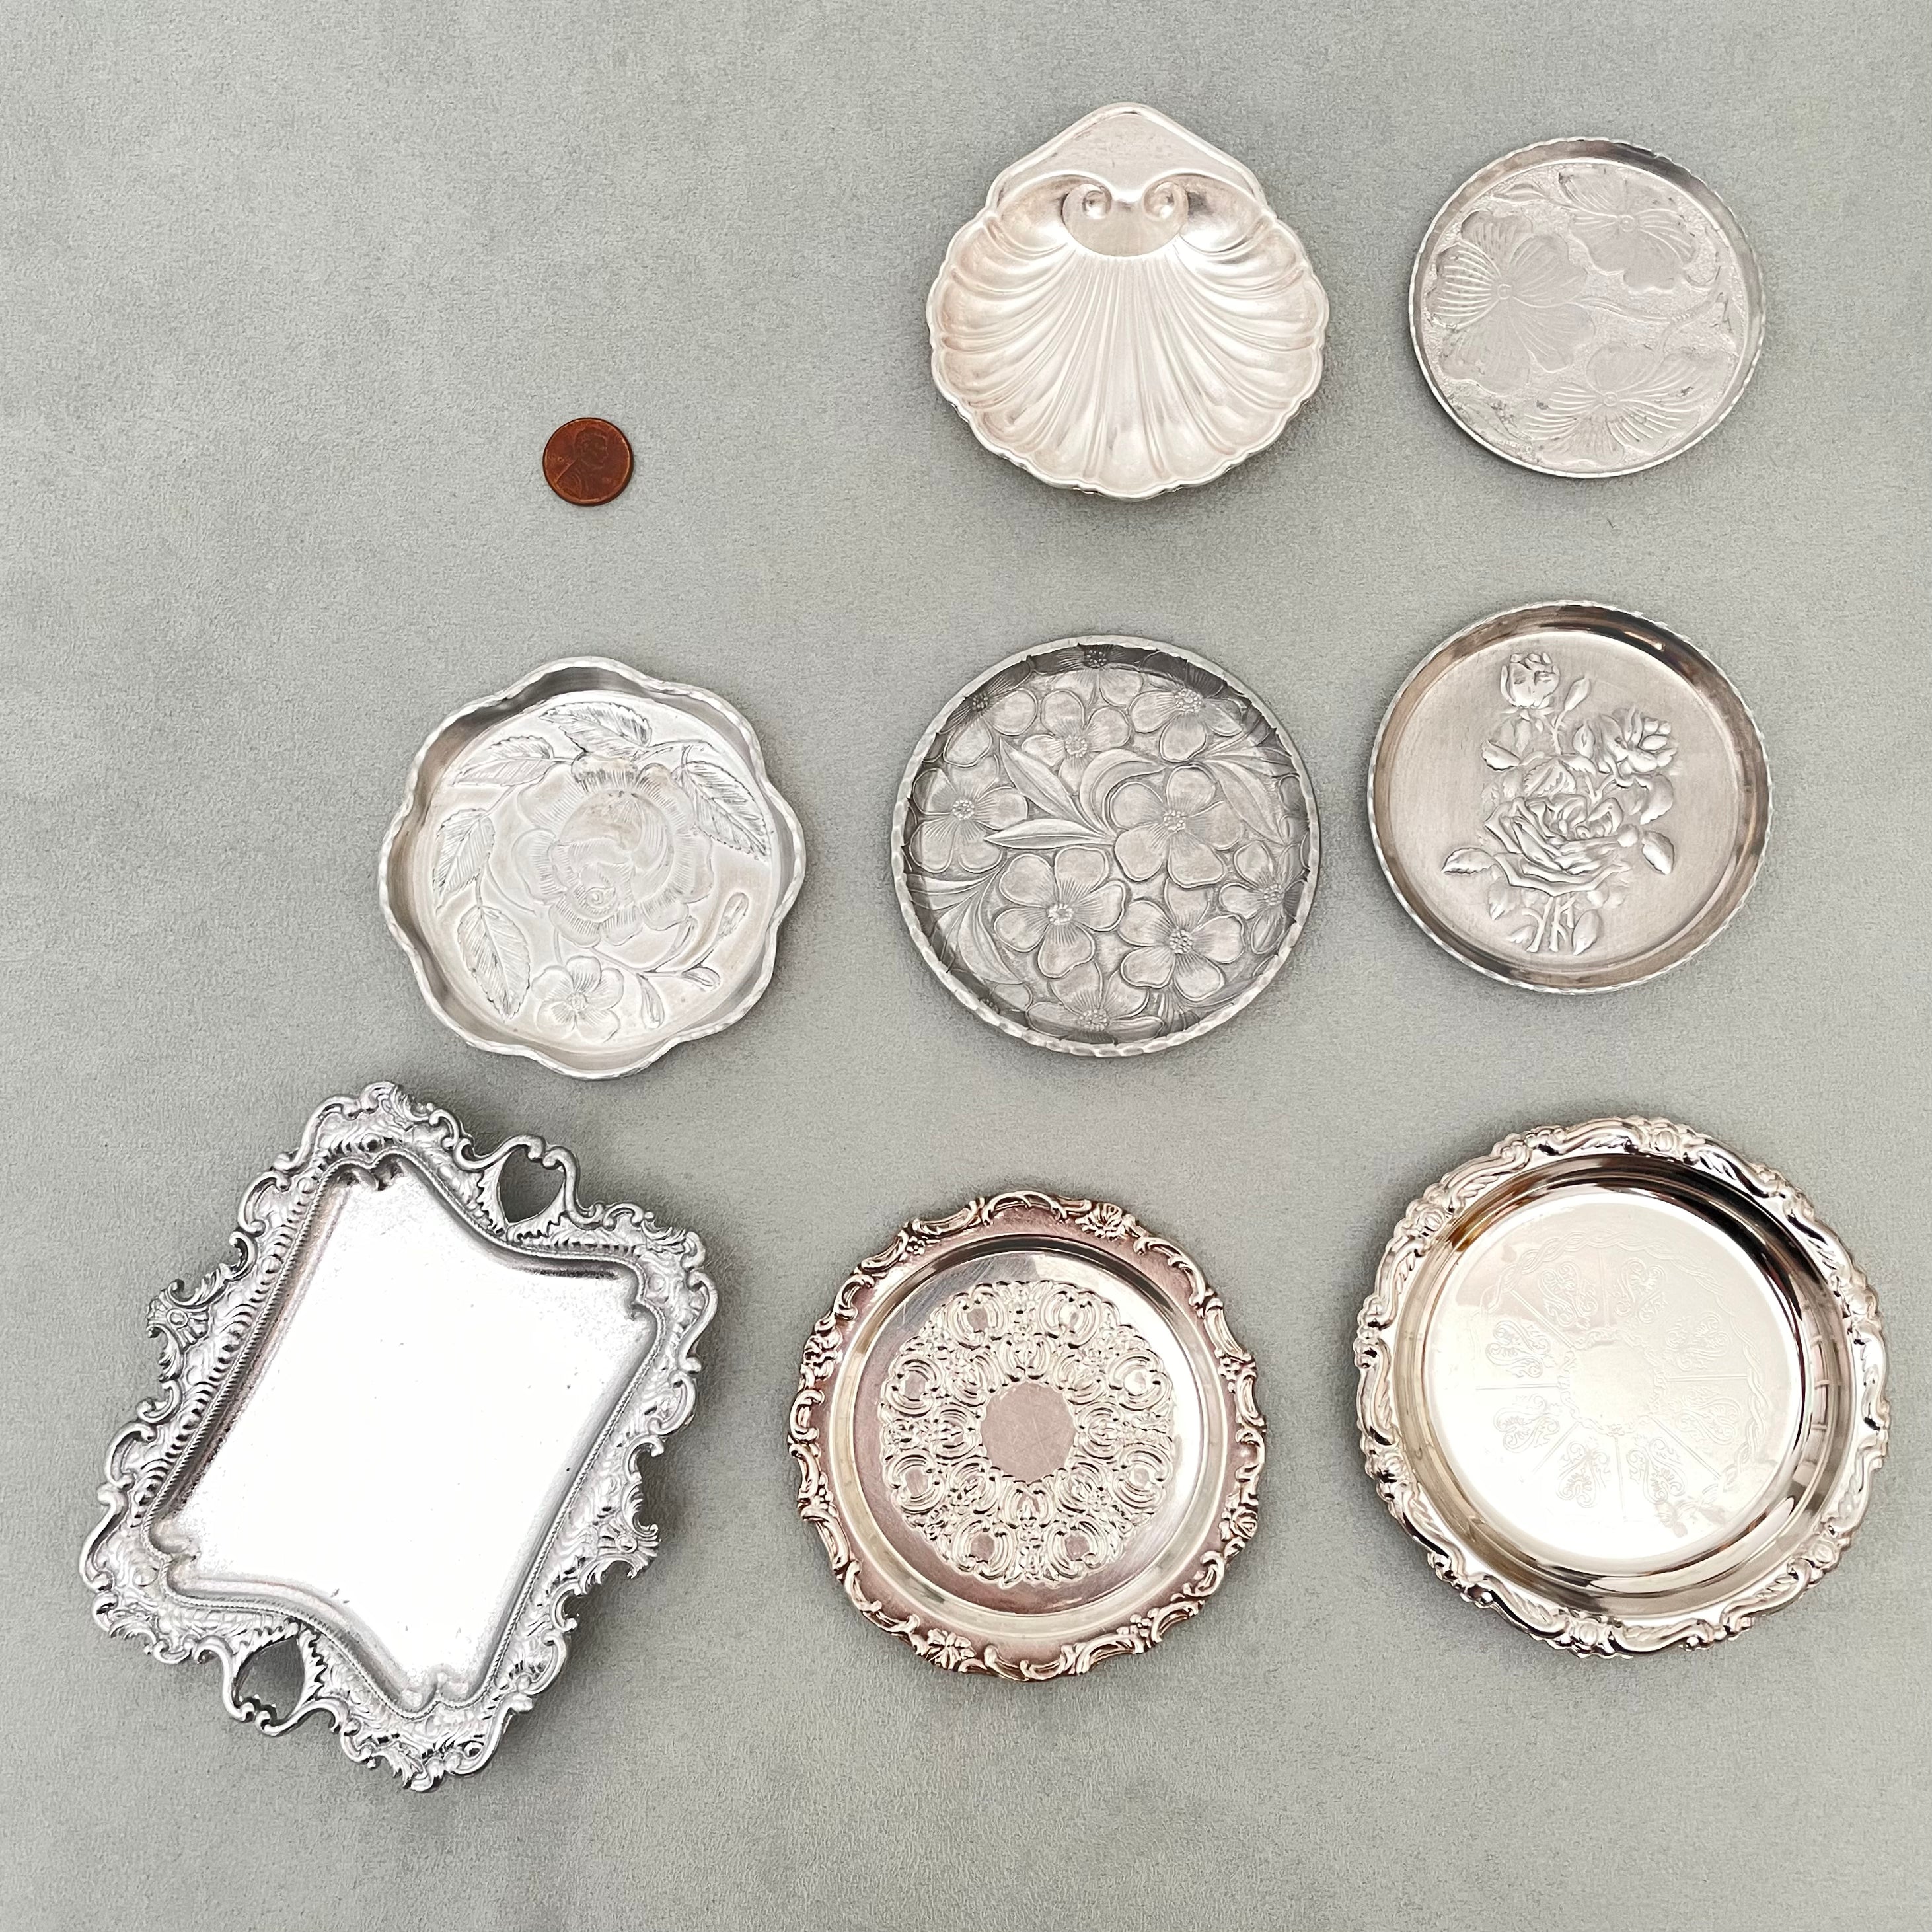 Collection of 8 vintage silver mini styling trays and dishes, penny beside for size reference, must have wedding flat lay props from Champagne & GRIT